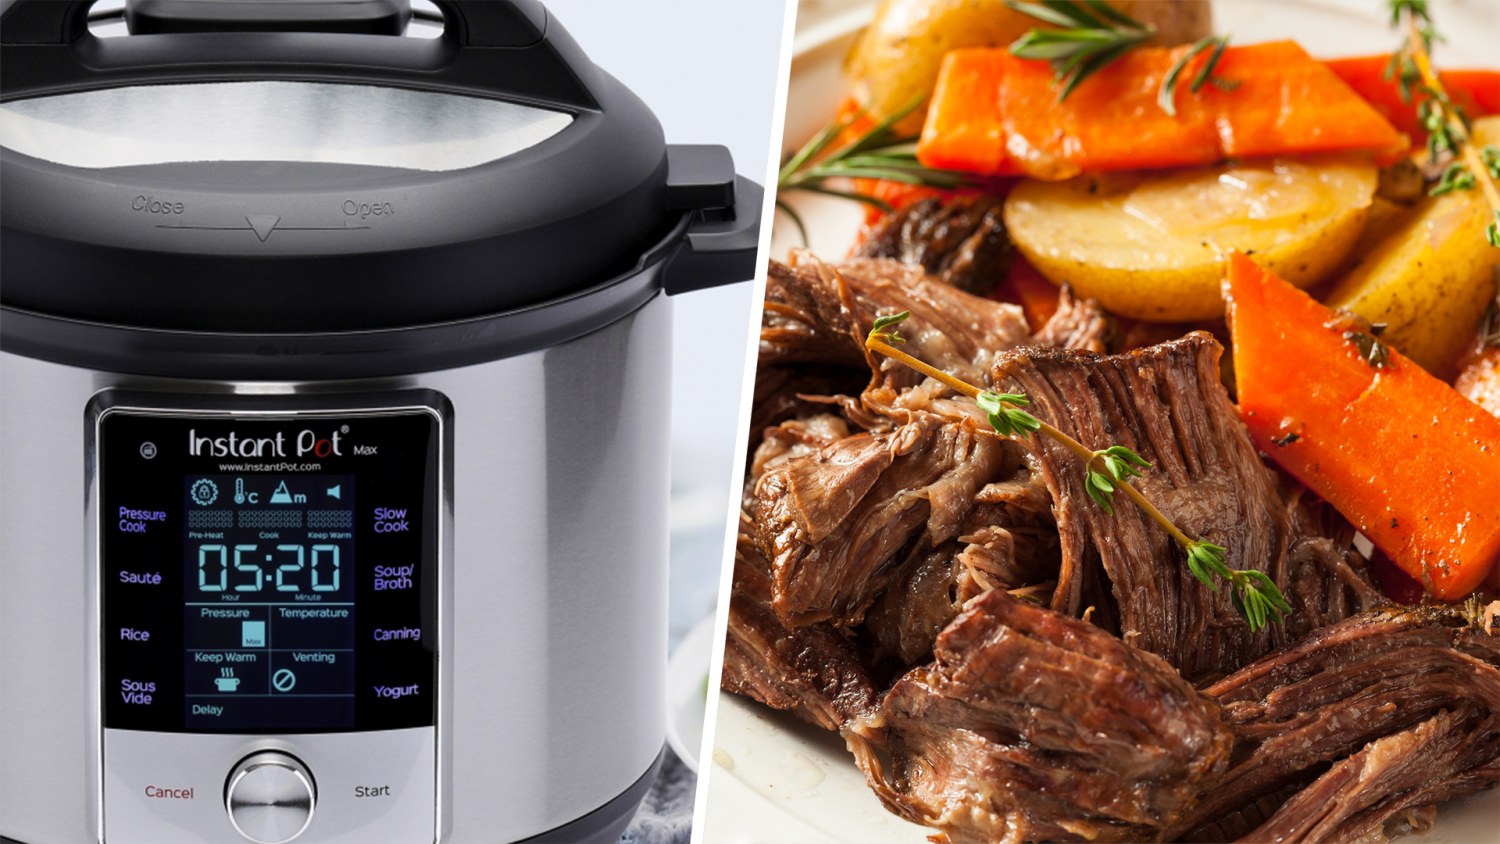 https://media-cldnry.s-nbcnews.com/image/upload/t_fit-1500w,f_auto,q_auto:best/newscms/2018_30/1355650/most-pinned-instant-pot-recipes-today-180725-tease.jpg